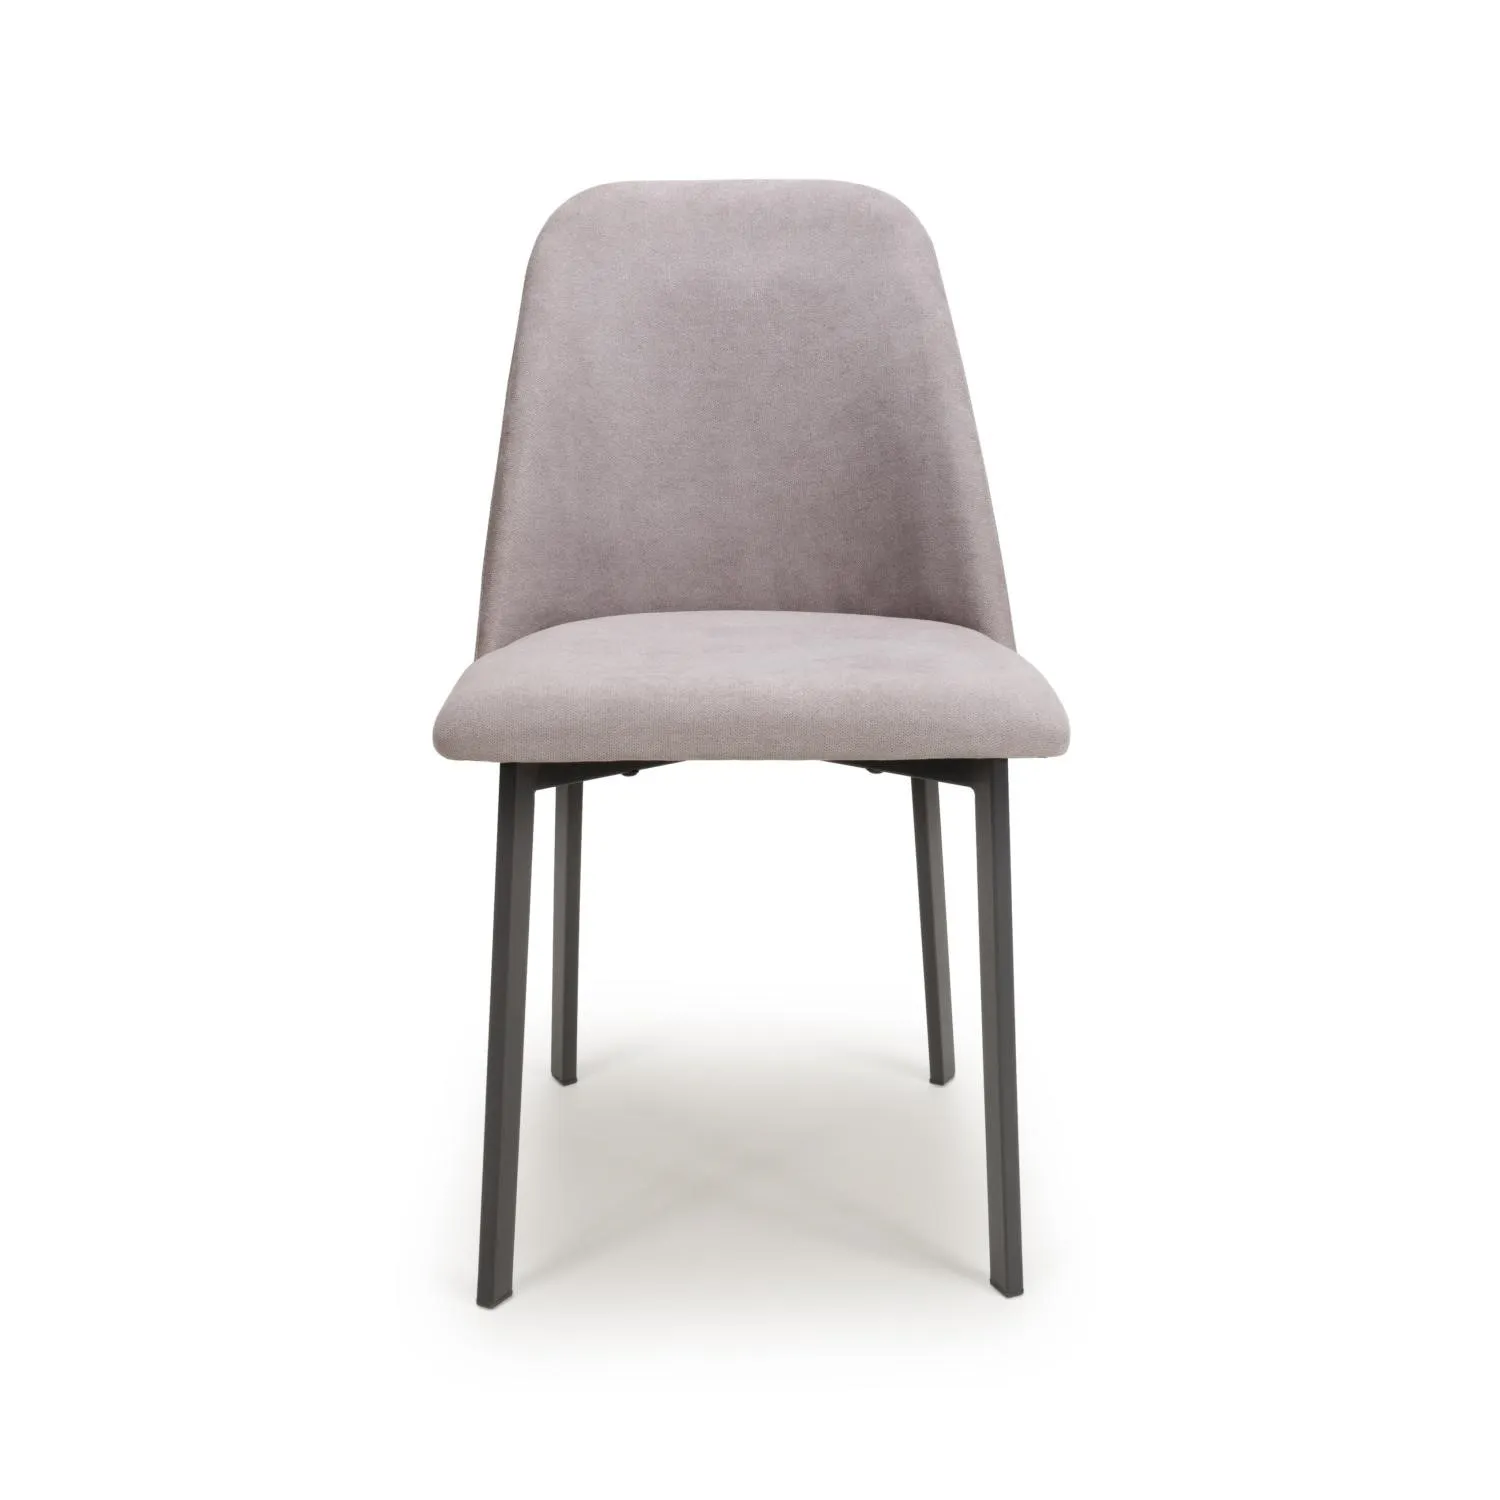 Light Grey Linen Fabric Dining Chair with Black Metal Legs